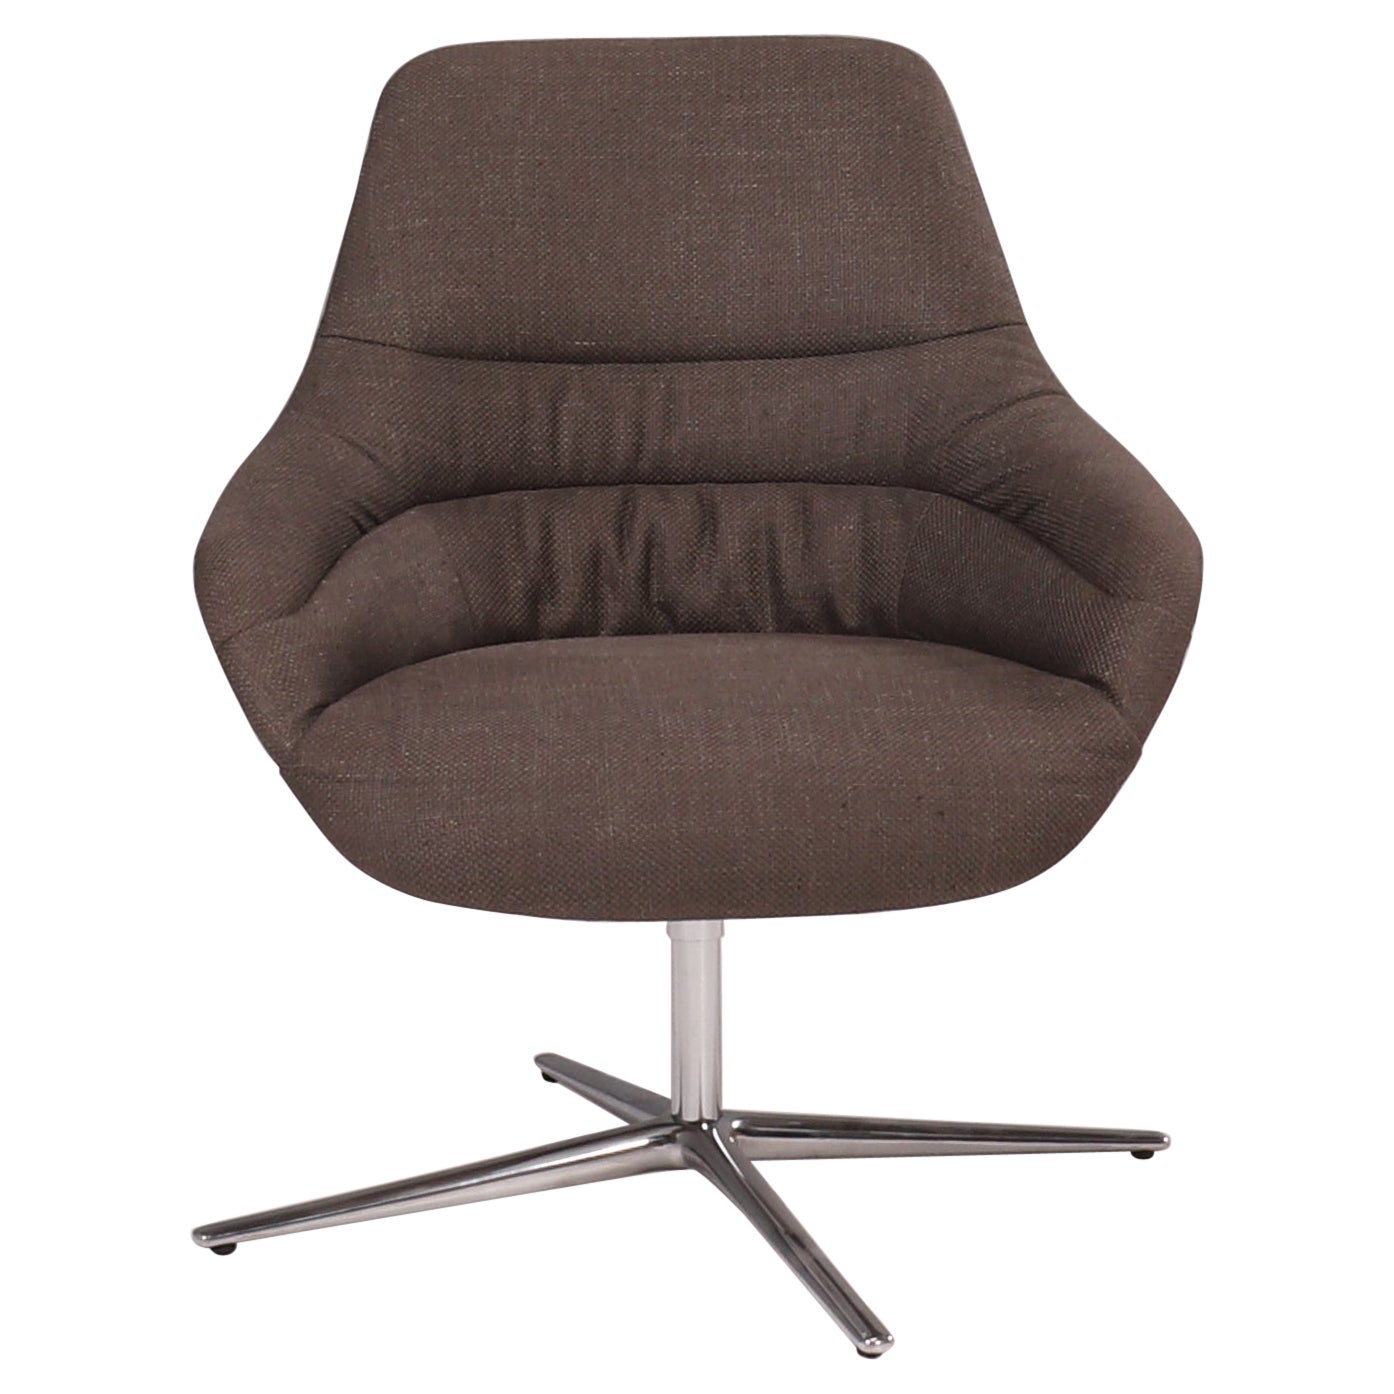 Walter Knoll Furniture - 68 For Sale at 1stDibs